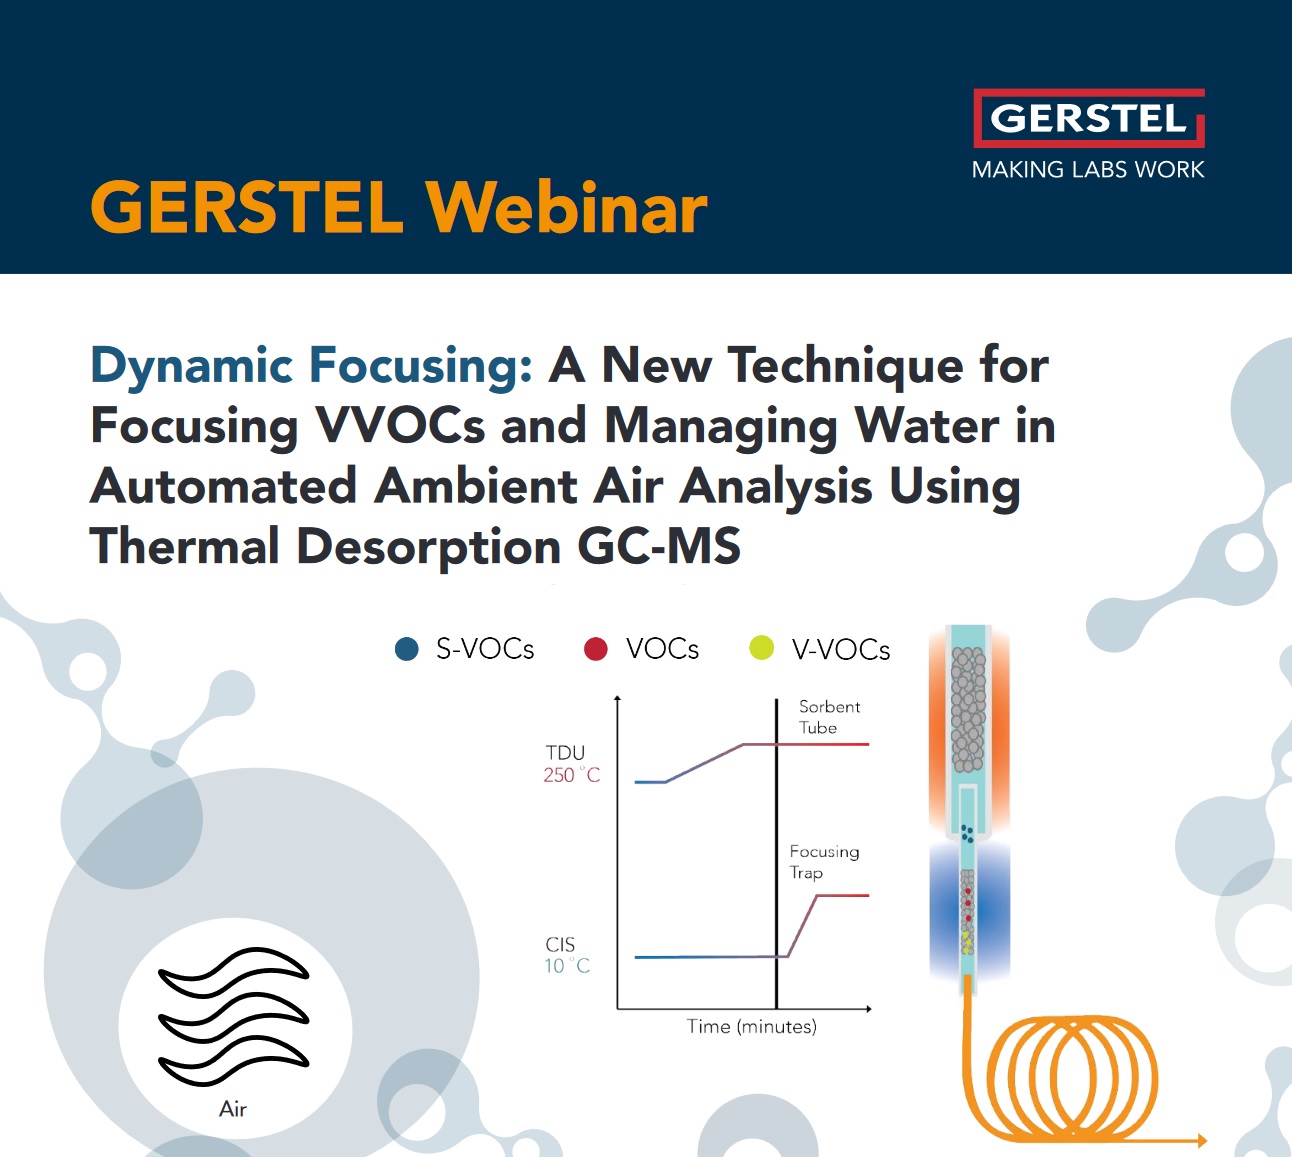 Gerstel: Dynamic Focusing: A New Technique for Focusing VVOCs and Managing Water in Automated Ambient Air Analysis